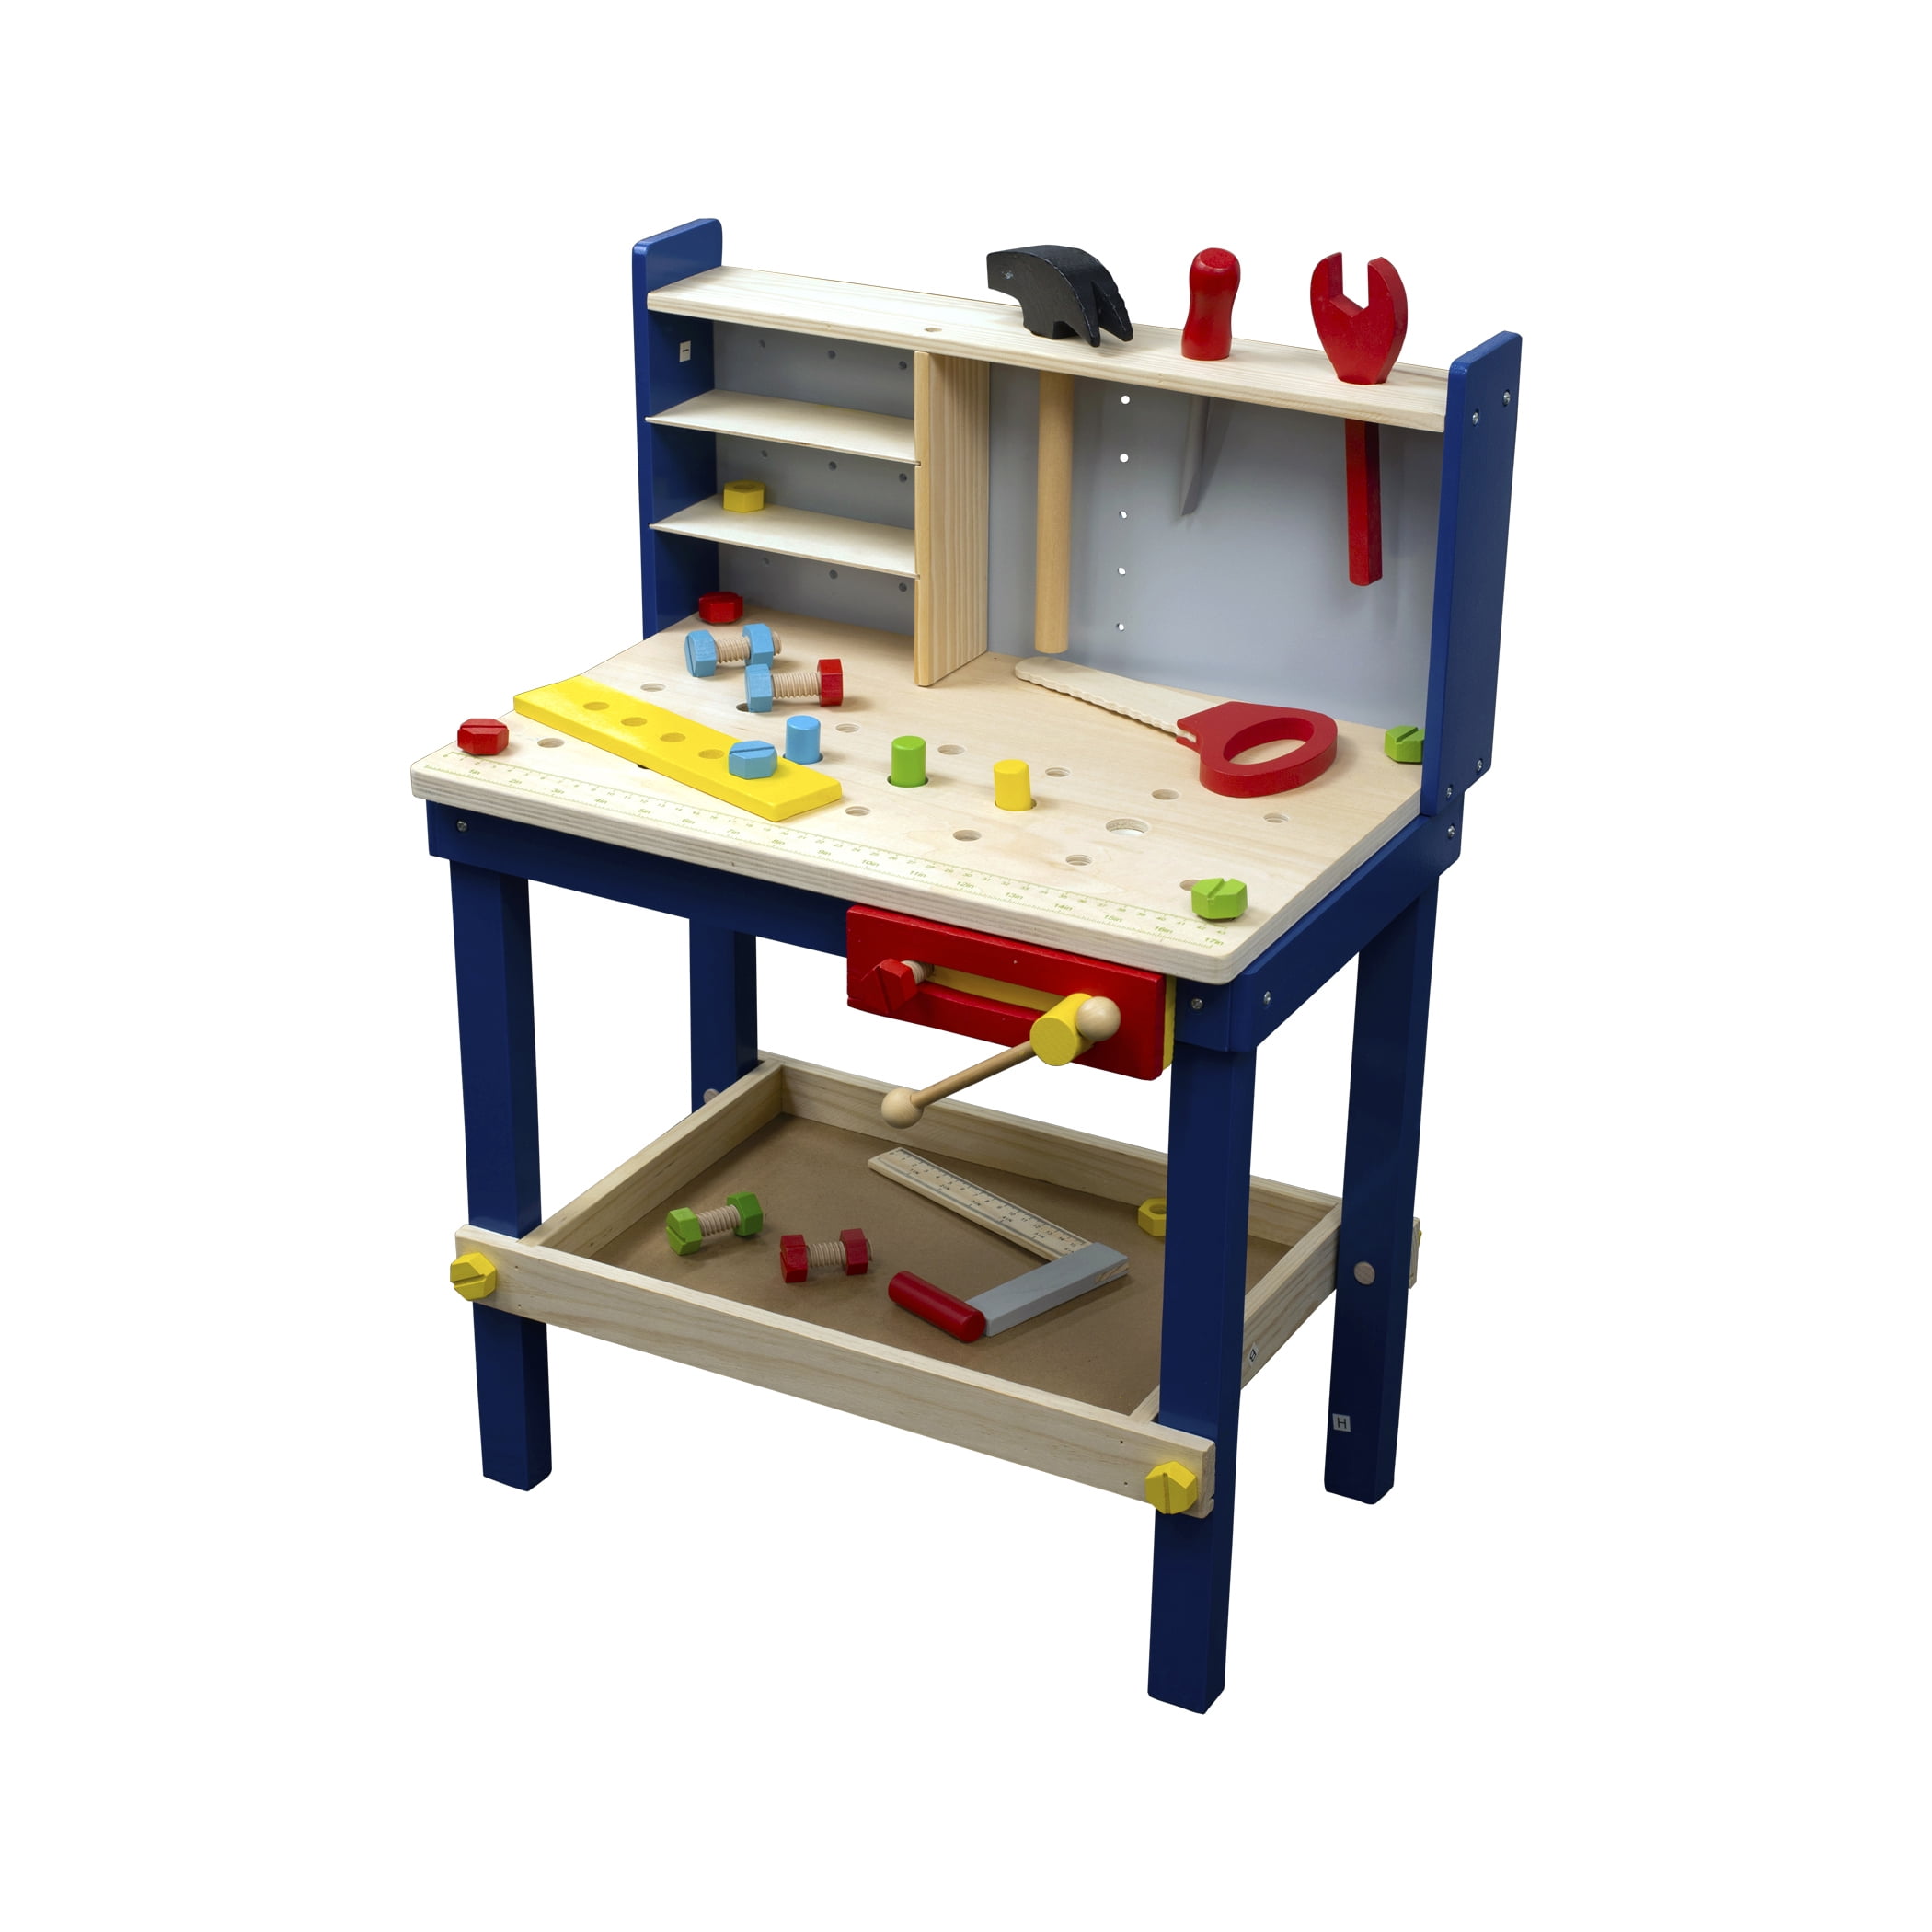 JOLIE VALL?E TOYS & HOME Workbench WoodenTool Bench for Kids Toy